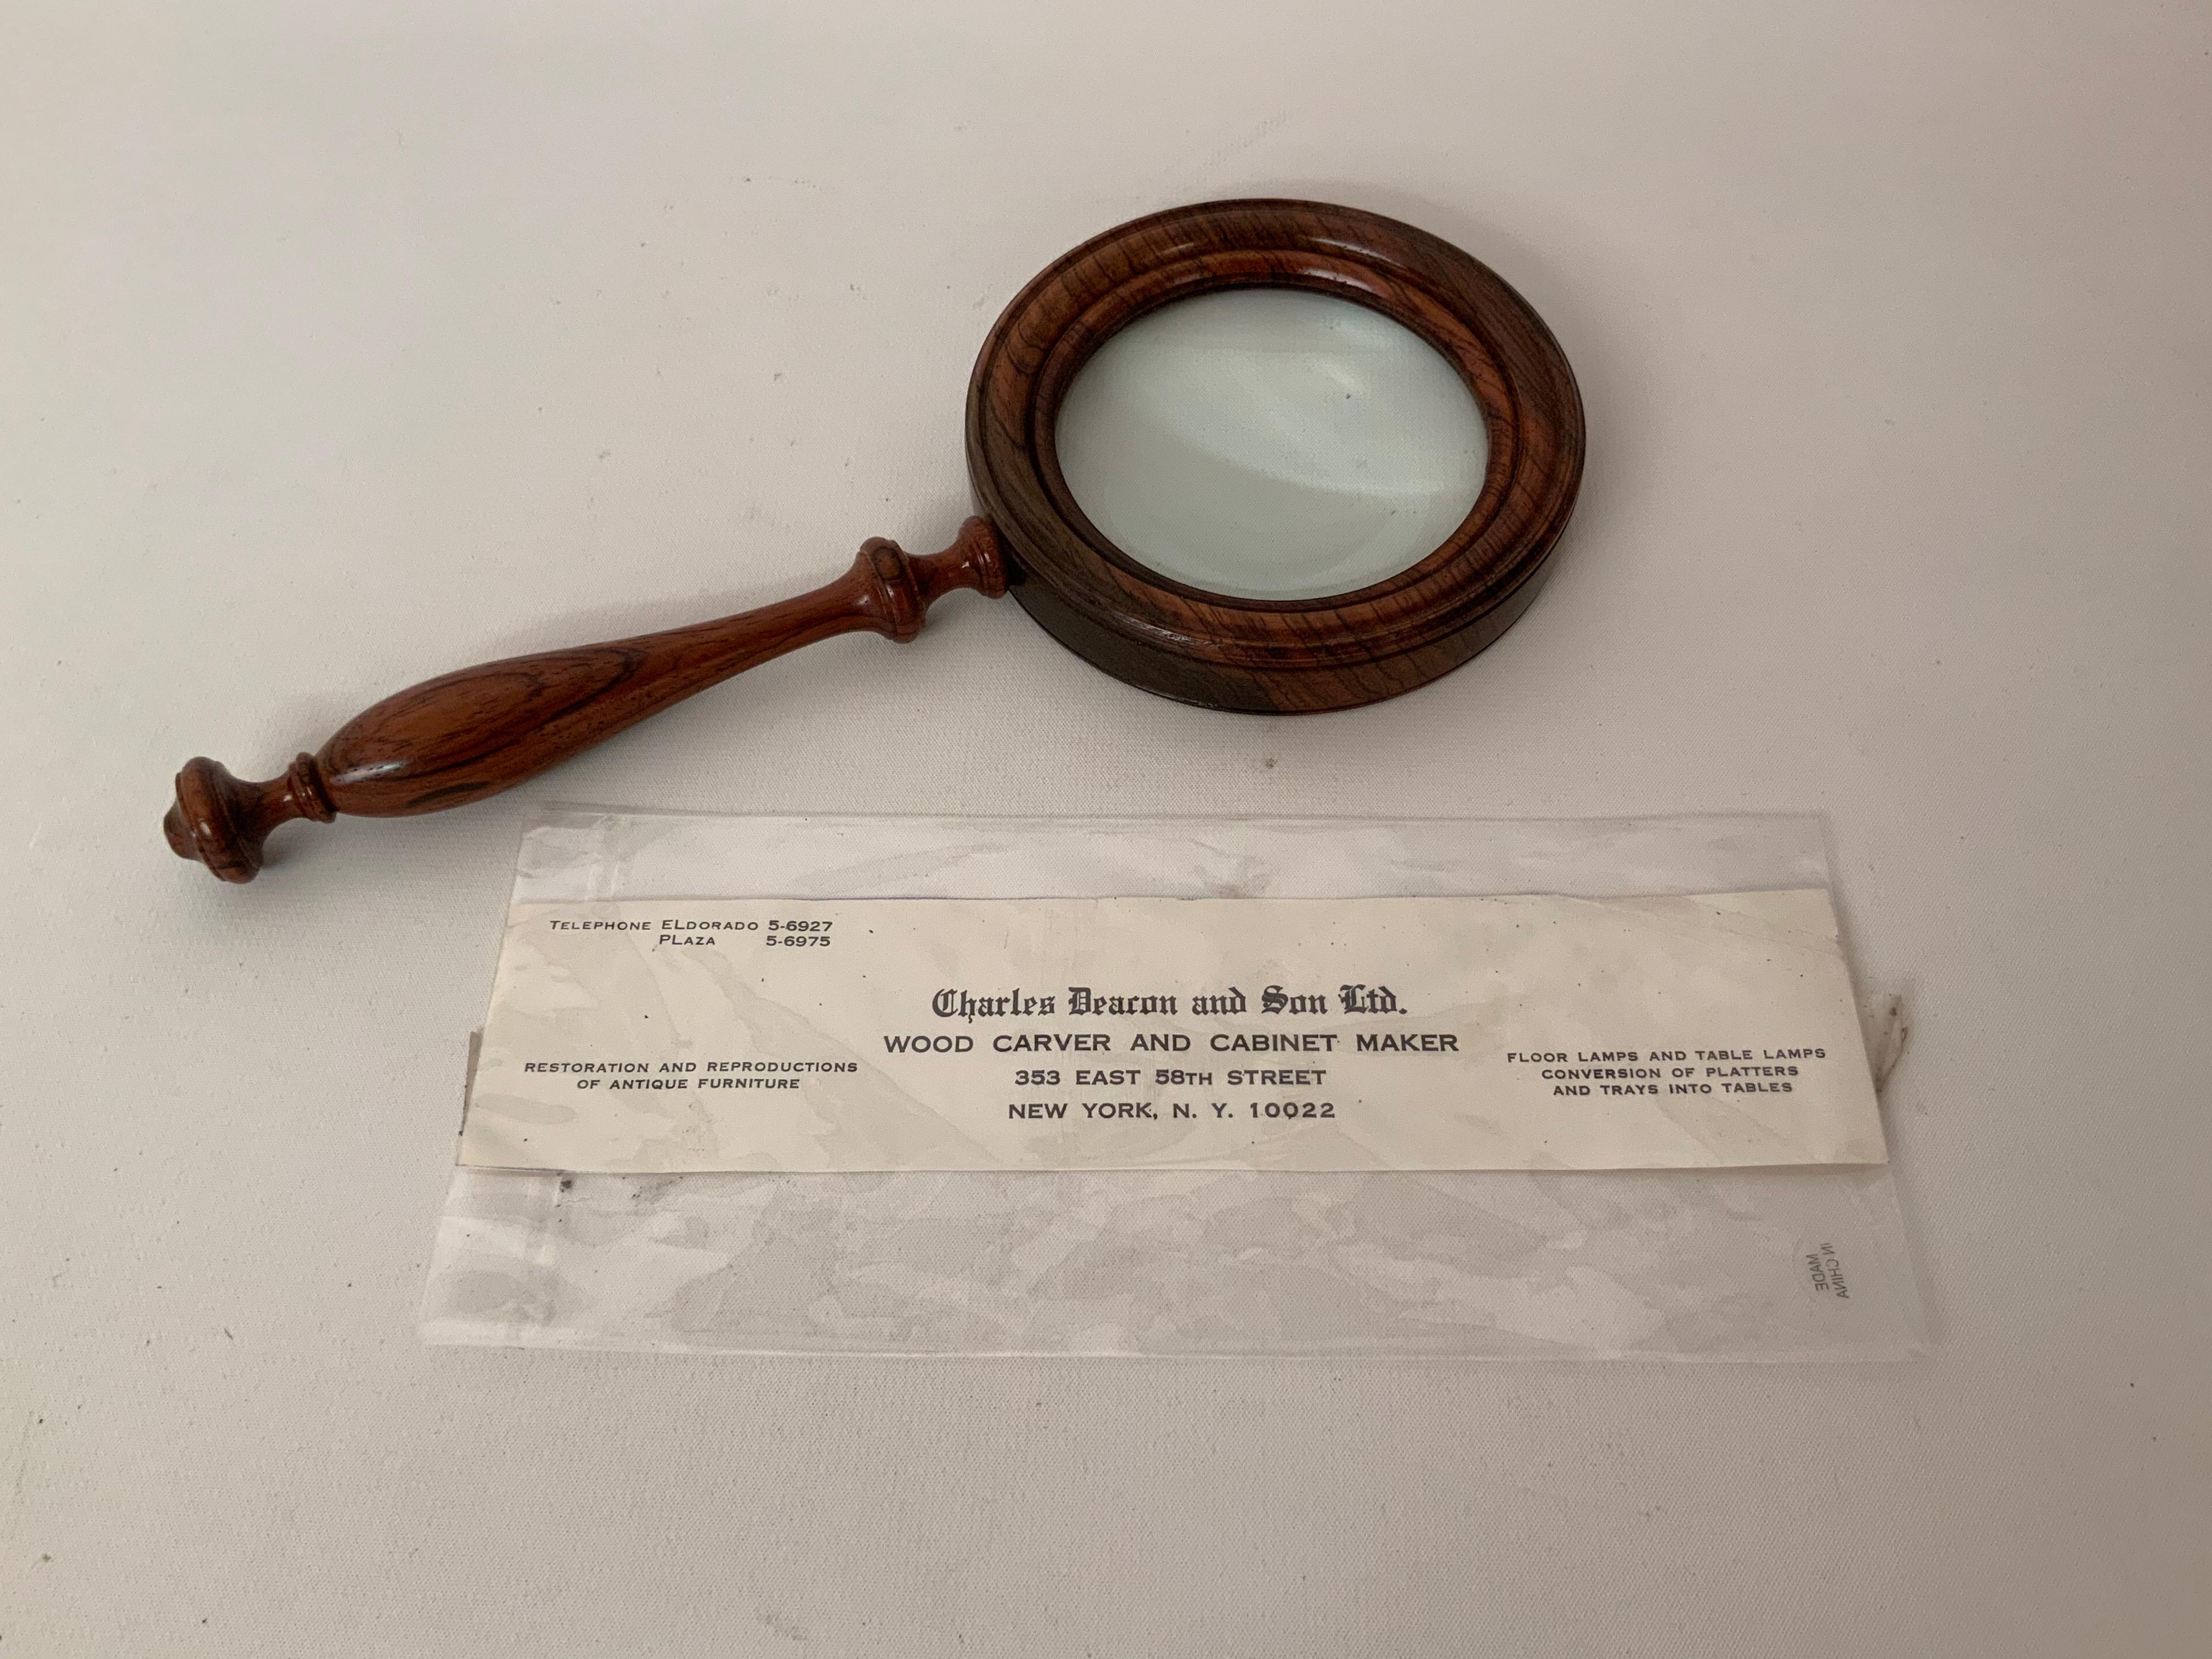 The solid rosewood magnifying glass is straight from the workshop of Charles Deacon and Son, 353 East 58th Street, NYC, circa late 1960s. Very good condition. No visible scratches on the lens.

Approximately 10